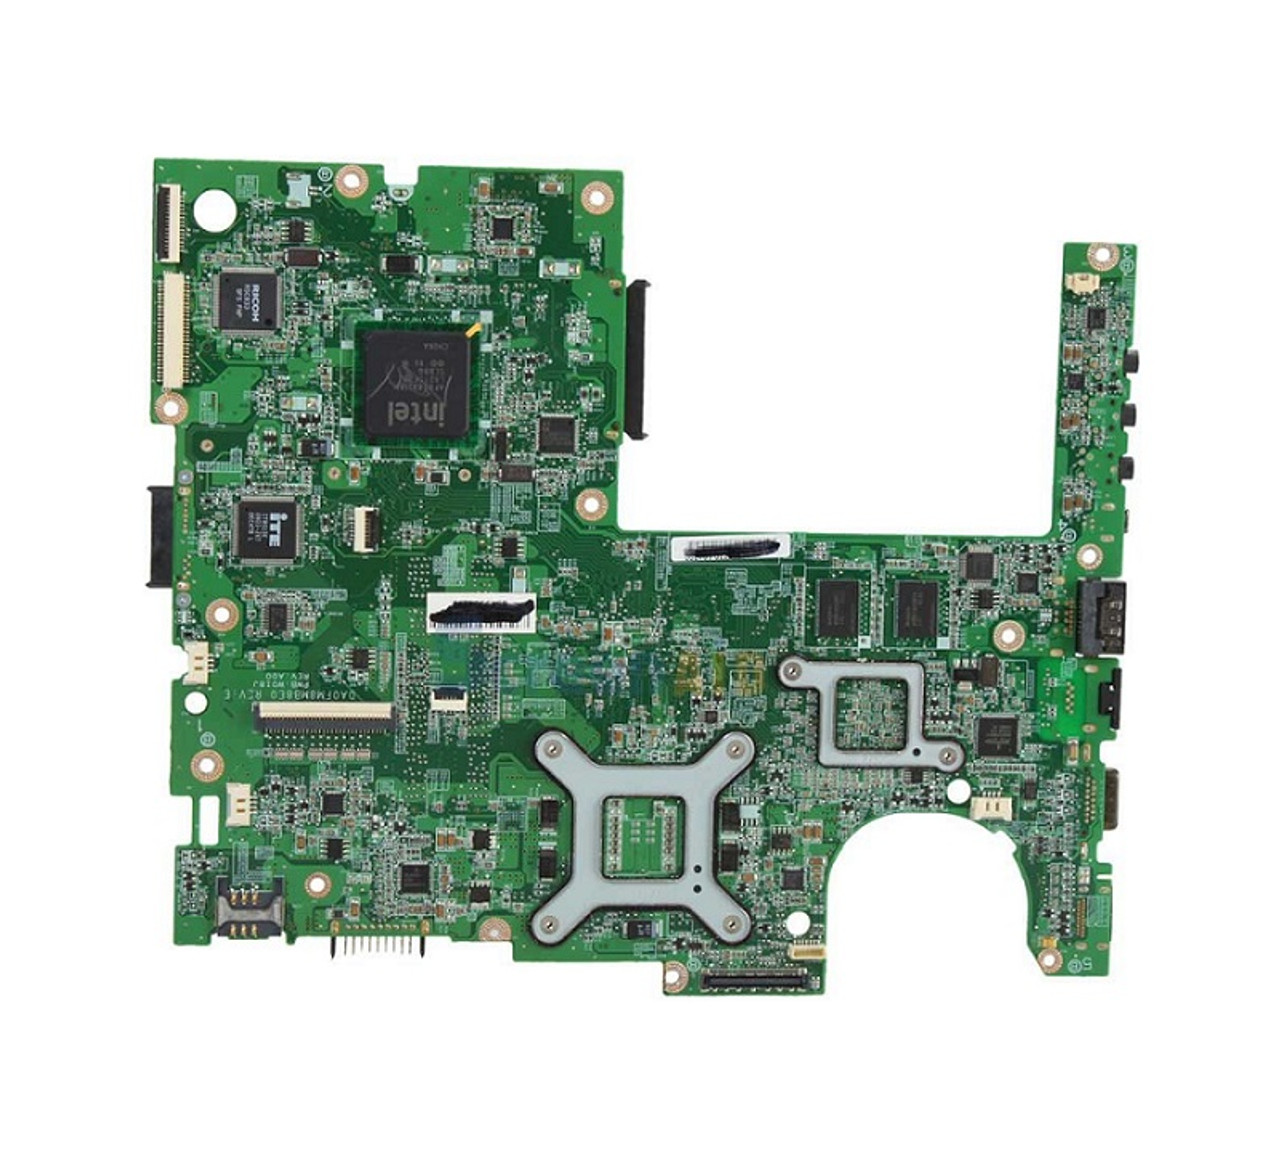 01YRTP - Dell System Board (Motherboard) for Inspiron 11 3147 Laptop (Refurbished)